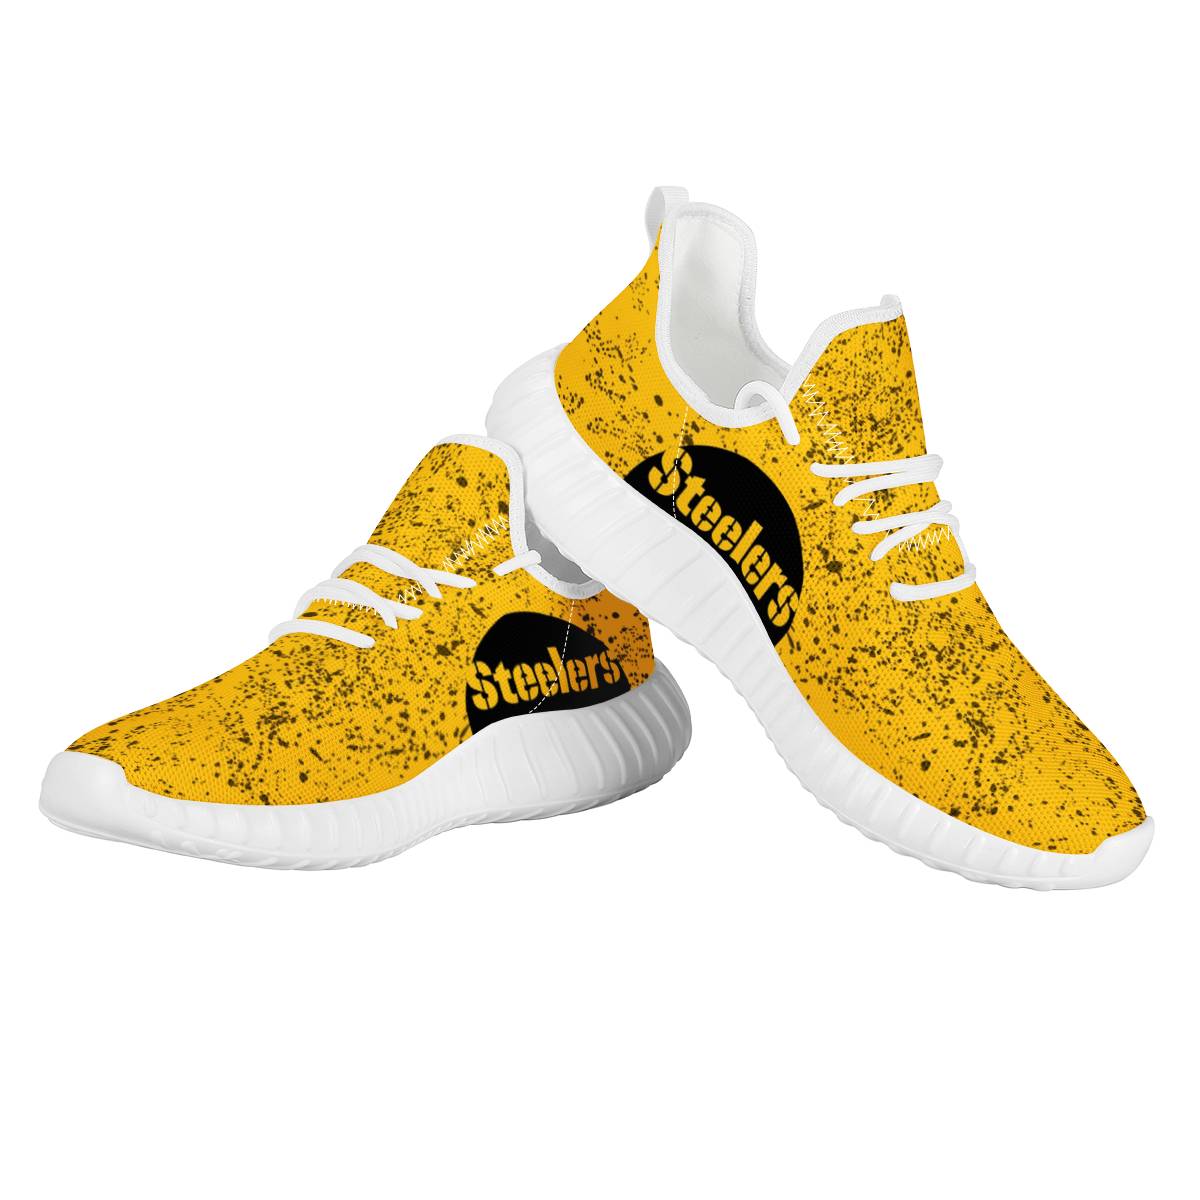 Men's Pittsburgh Steelers Mesh Knit Sneakers/Shoes 002